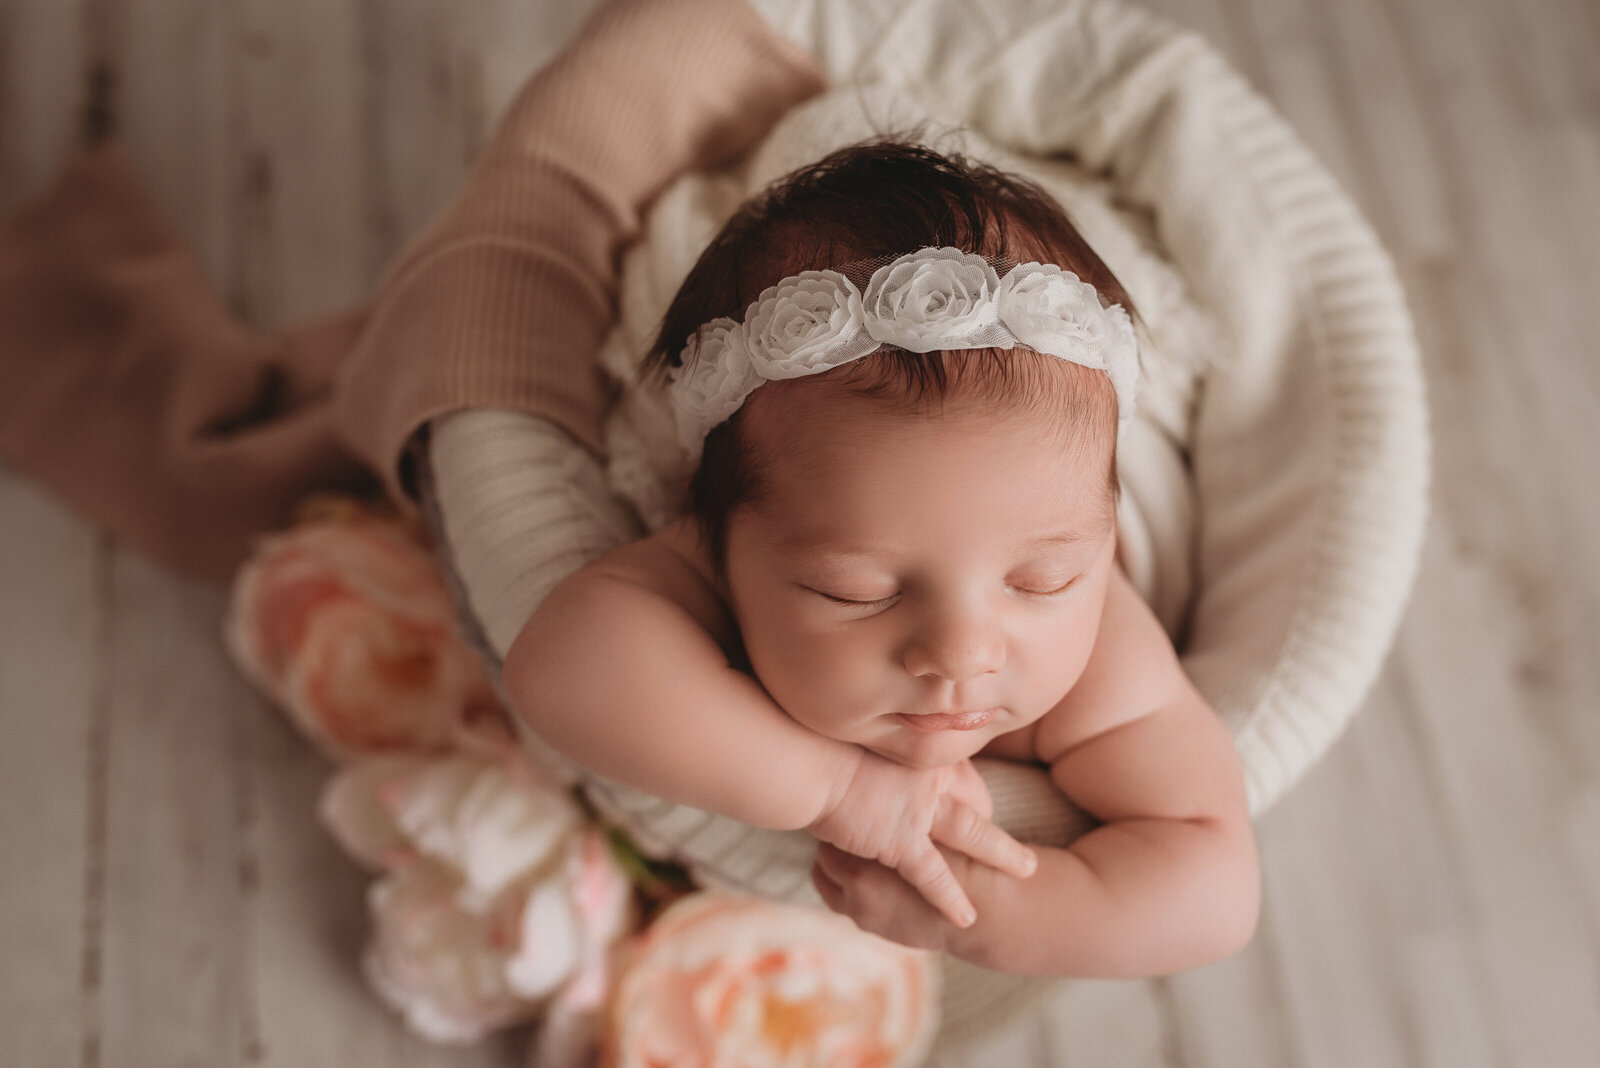 Newborn girl portrait in basket on white flooring with chin on hands and flower headband. Photo shot from above and looking down at baby girl.